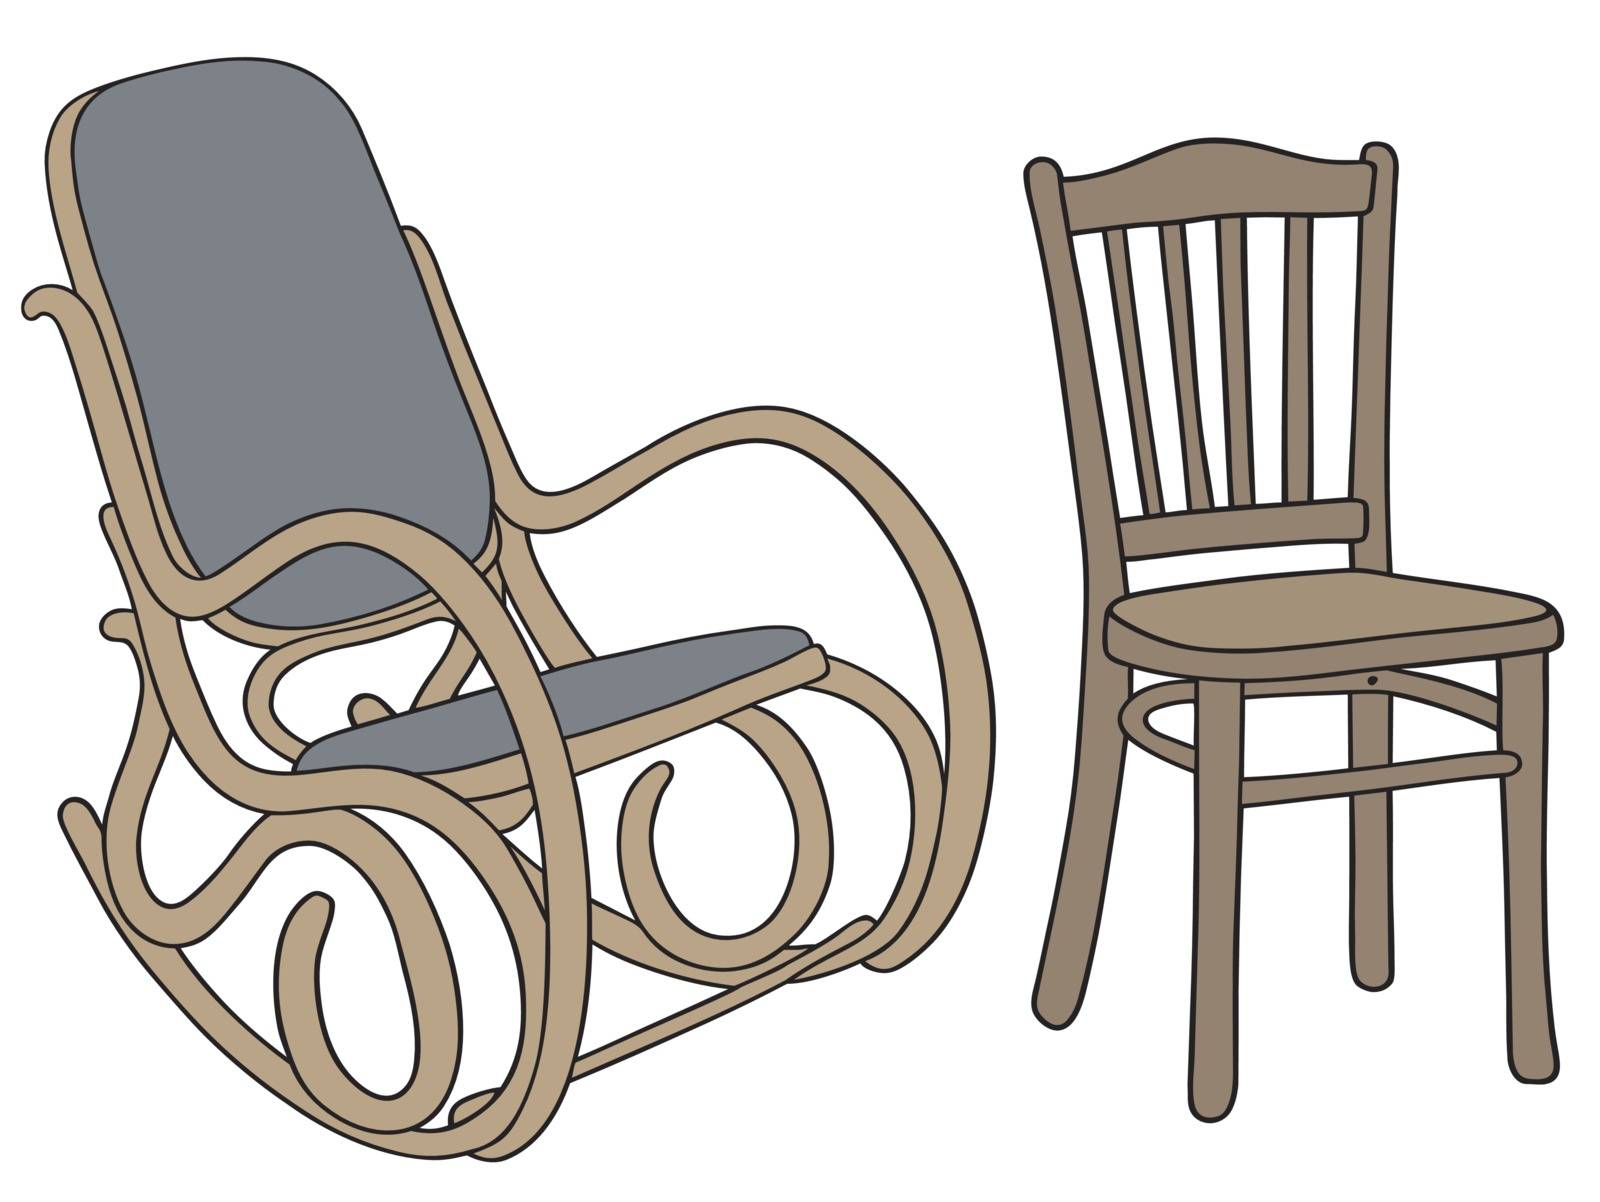 Hand drawing of an old wooden rocker and chair